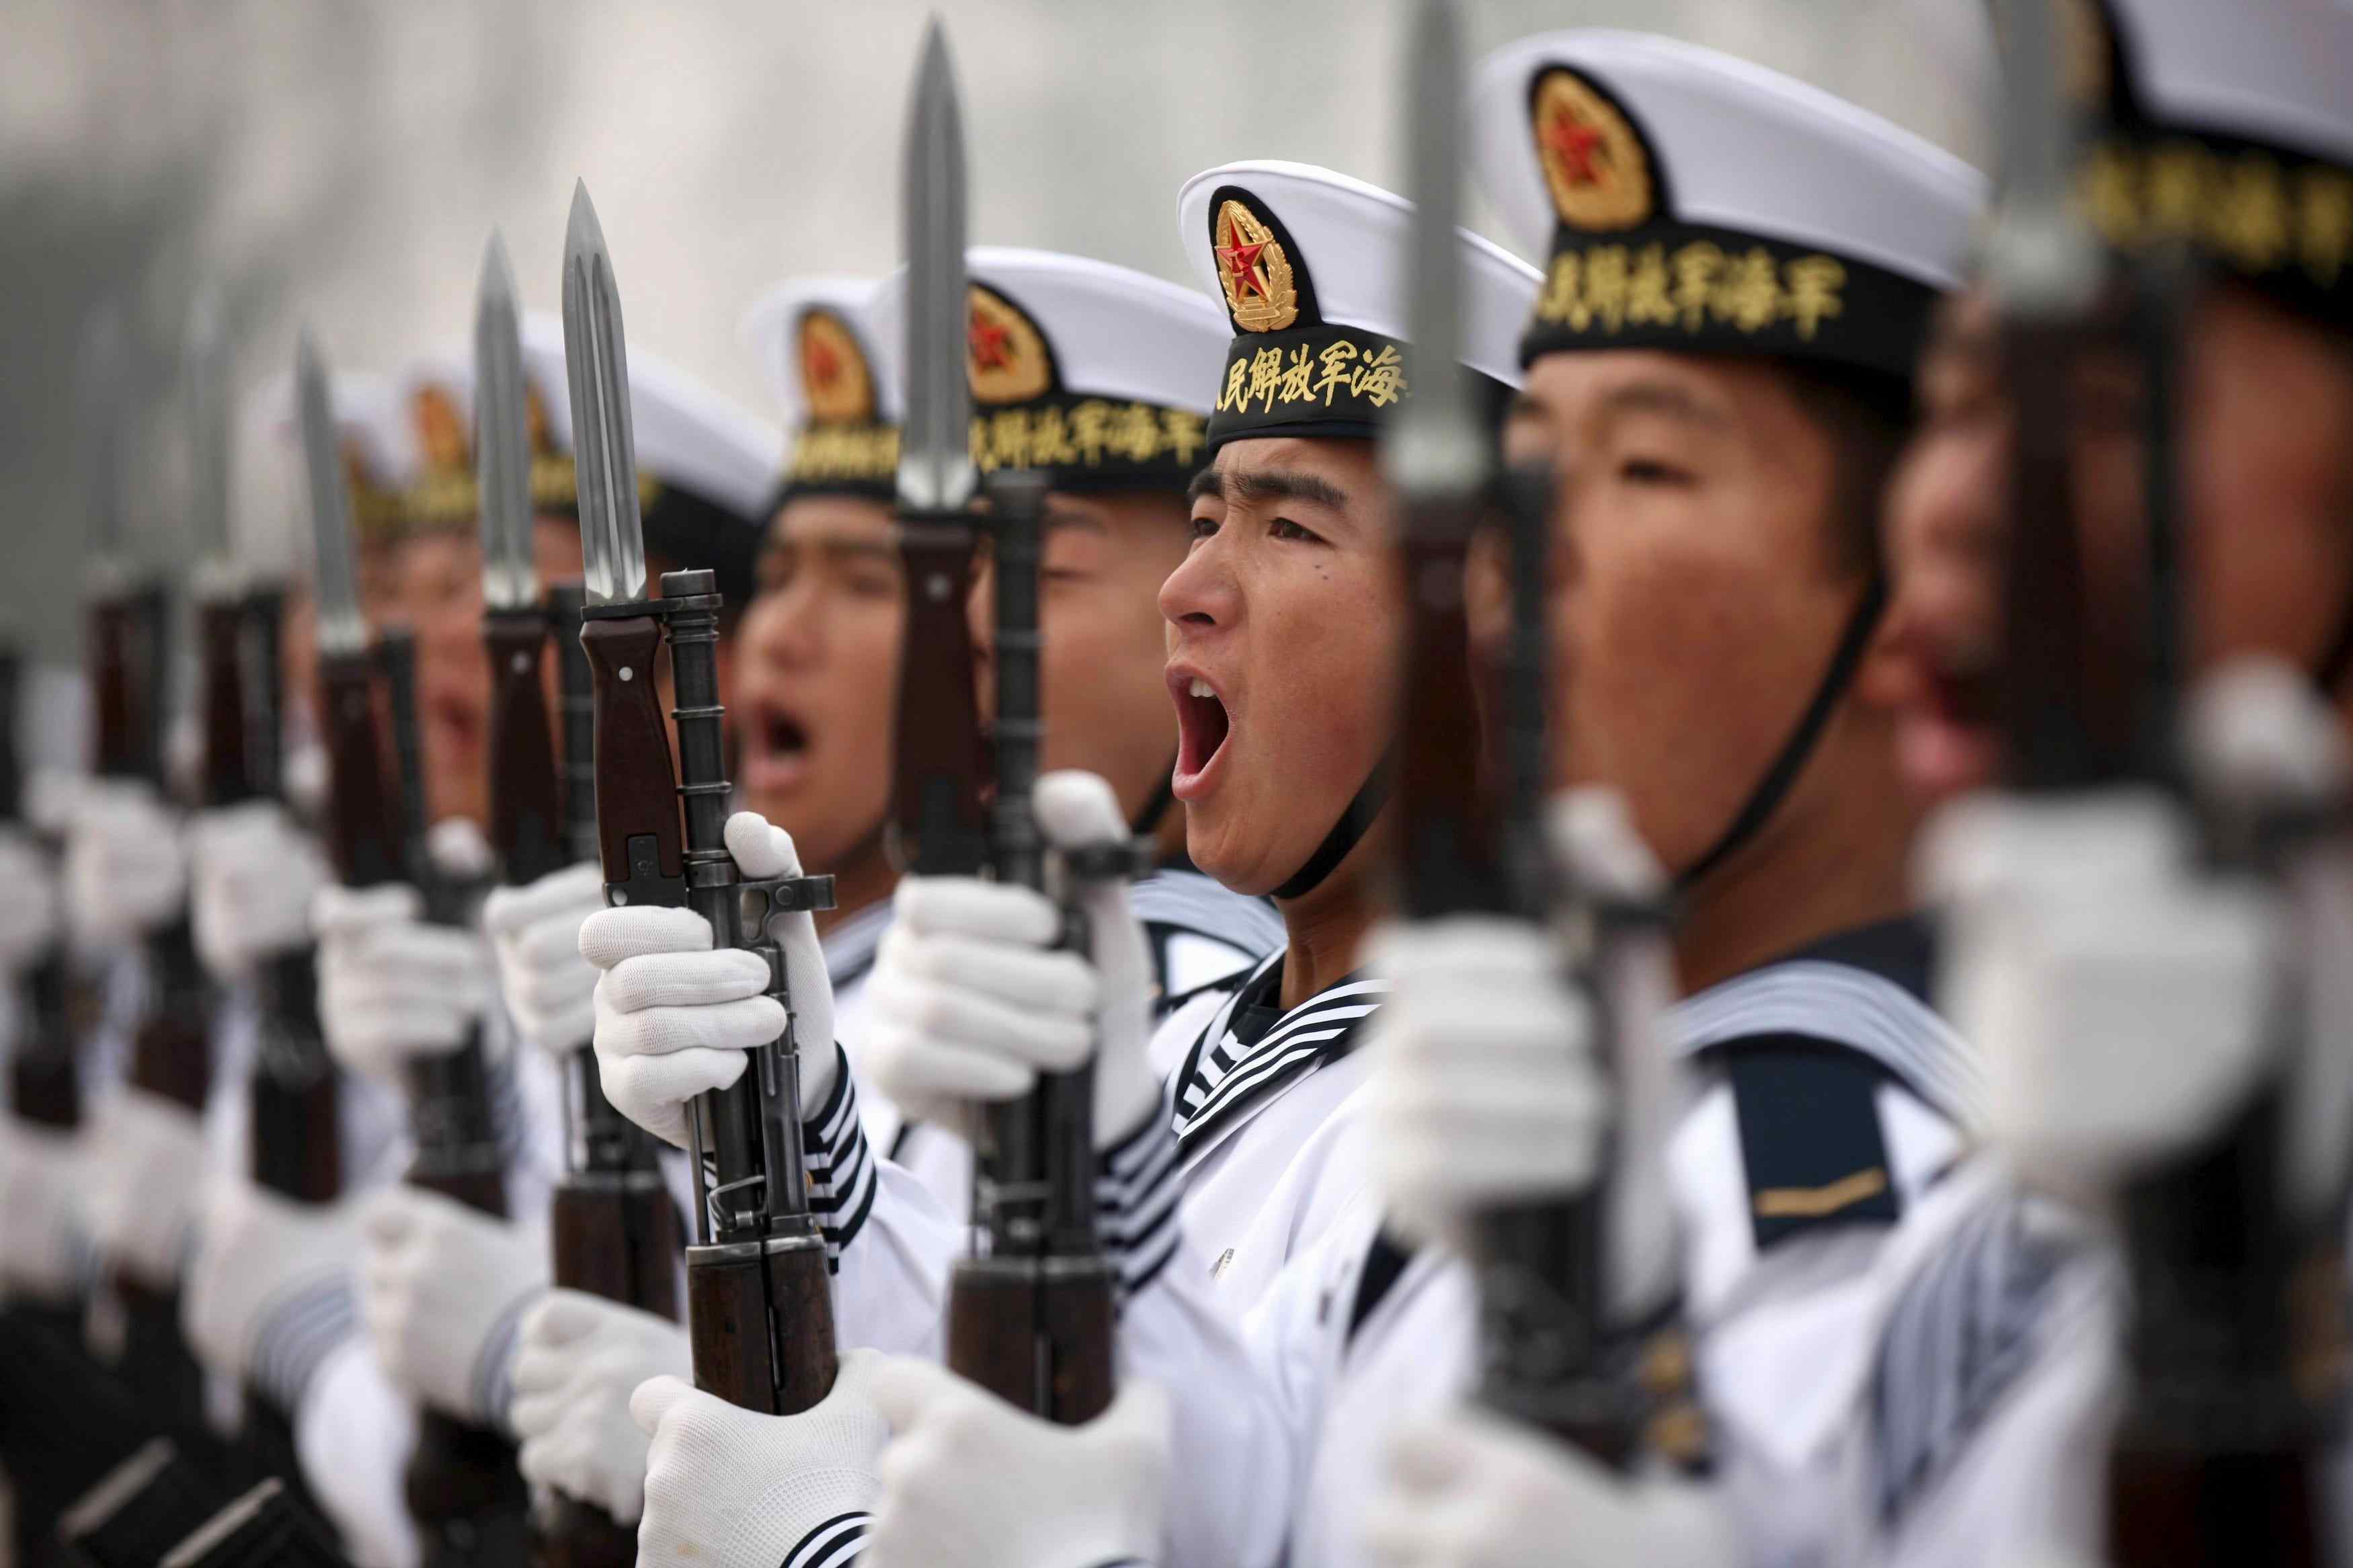 China may be trying to take over a critical US air base in the Atlantic